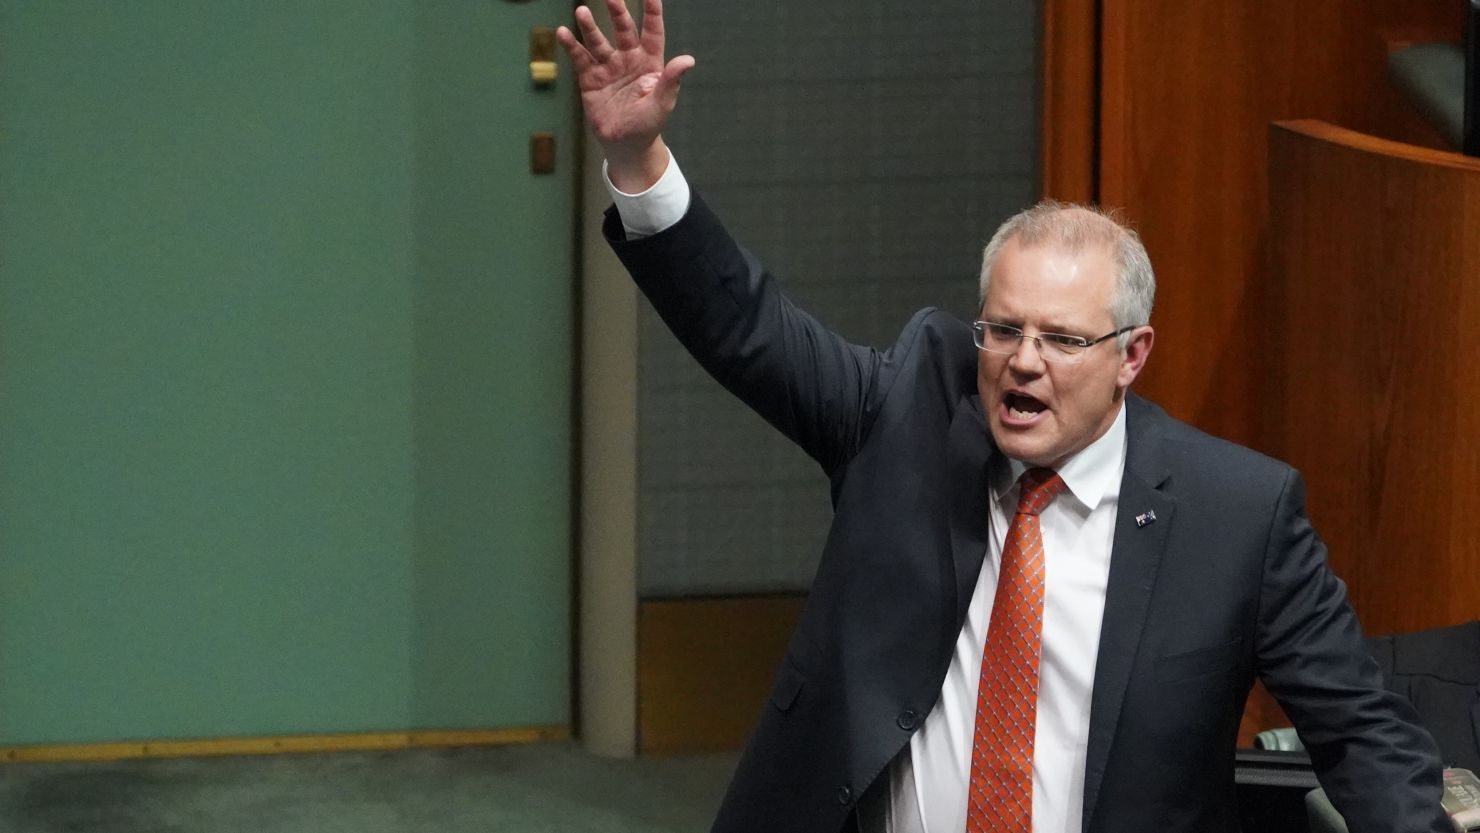 Australian Prime Minister Prime Minister Scott Morrison during Question Time in the House of Representatives at Parliament House on Thursday, getting his hands up.